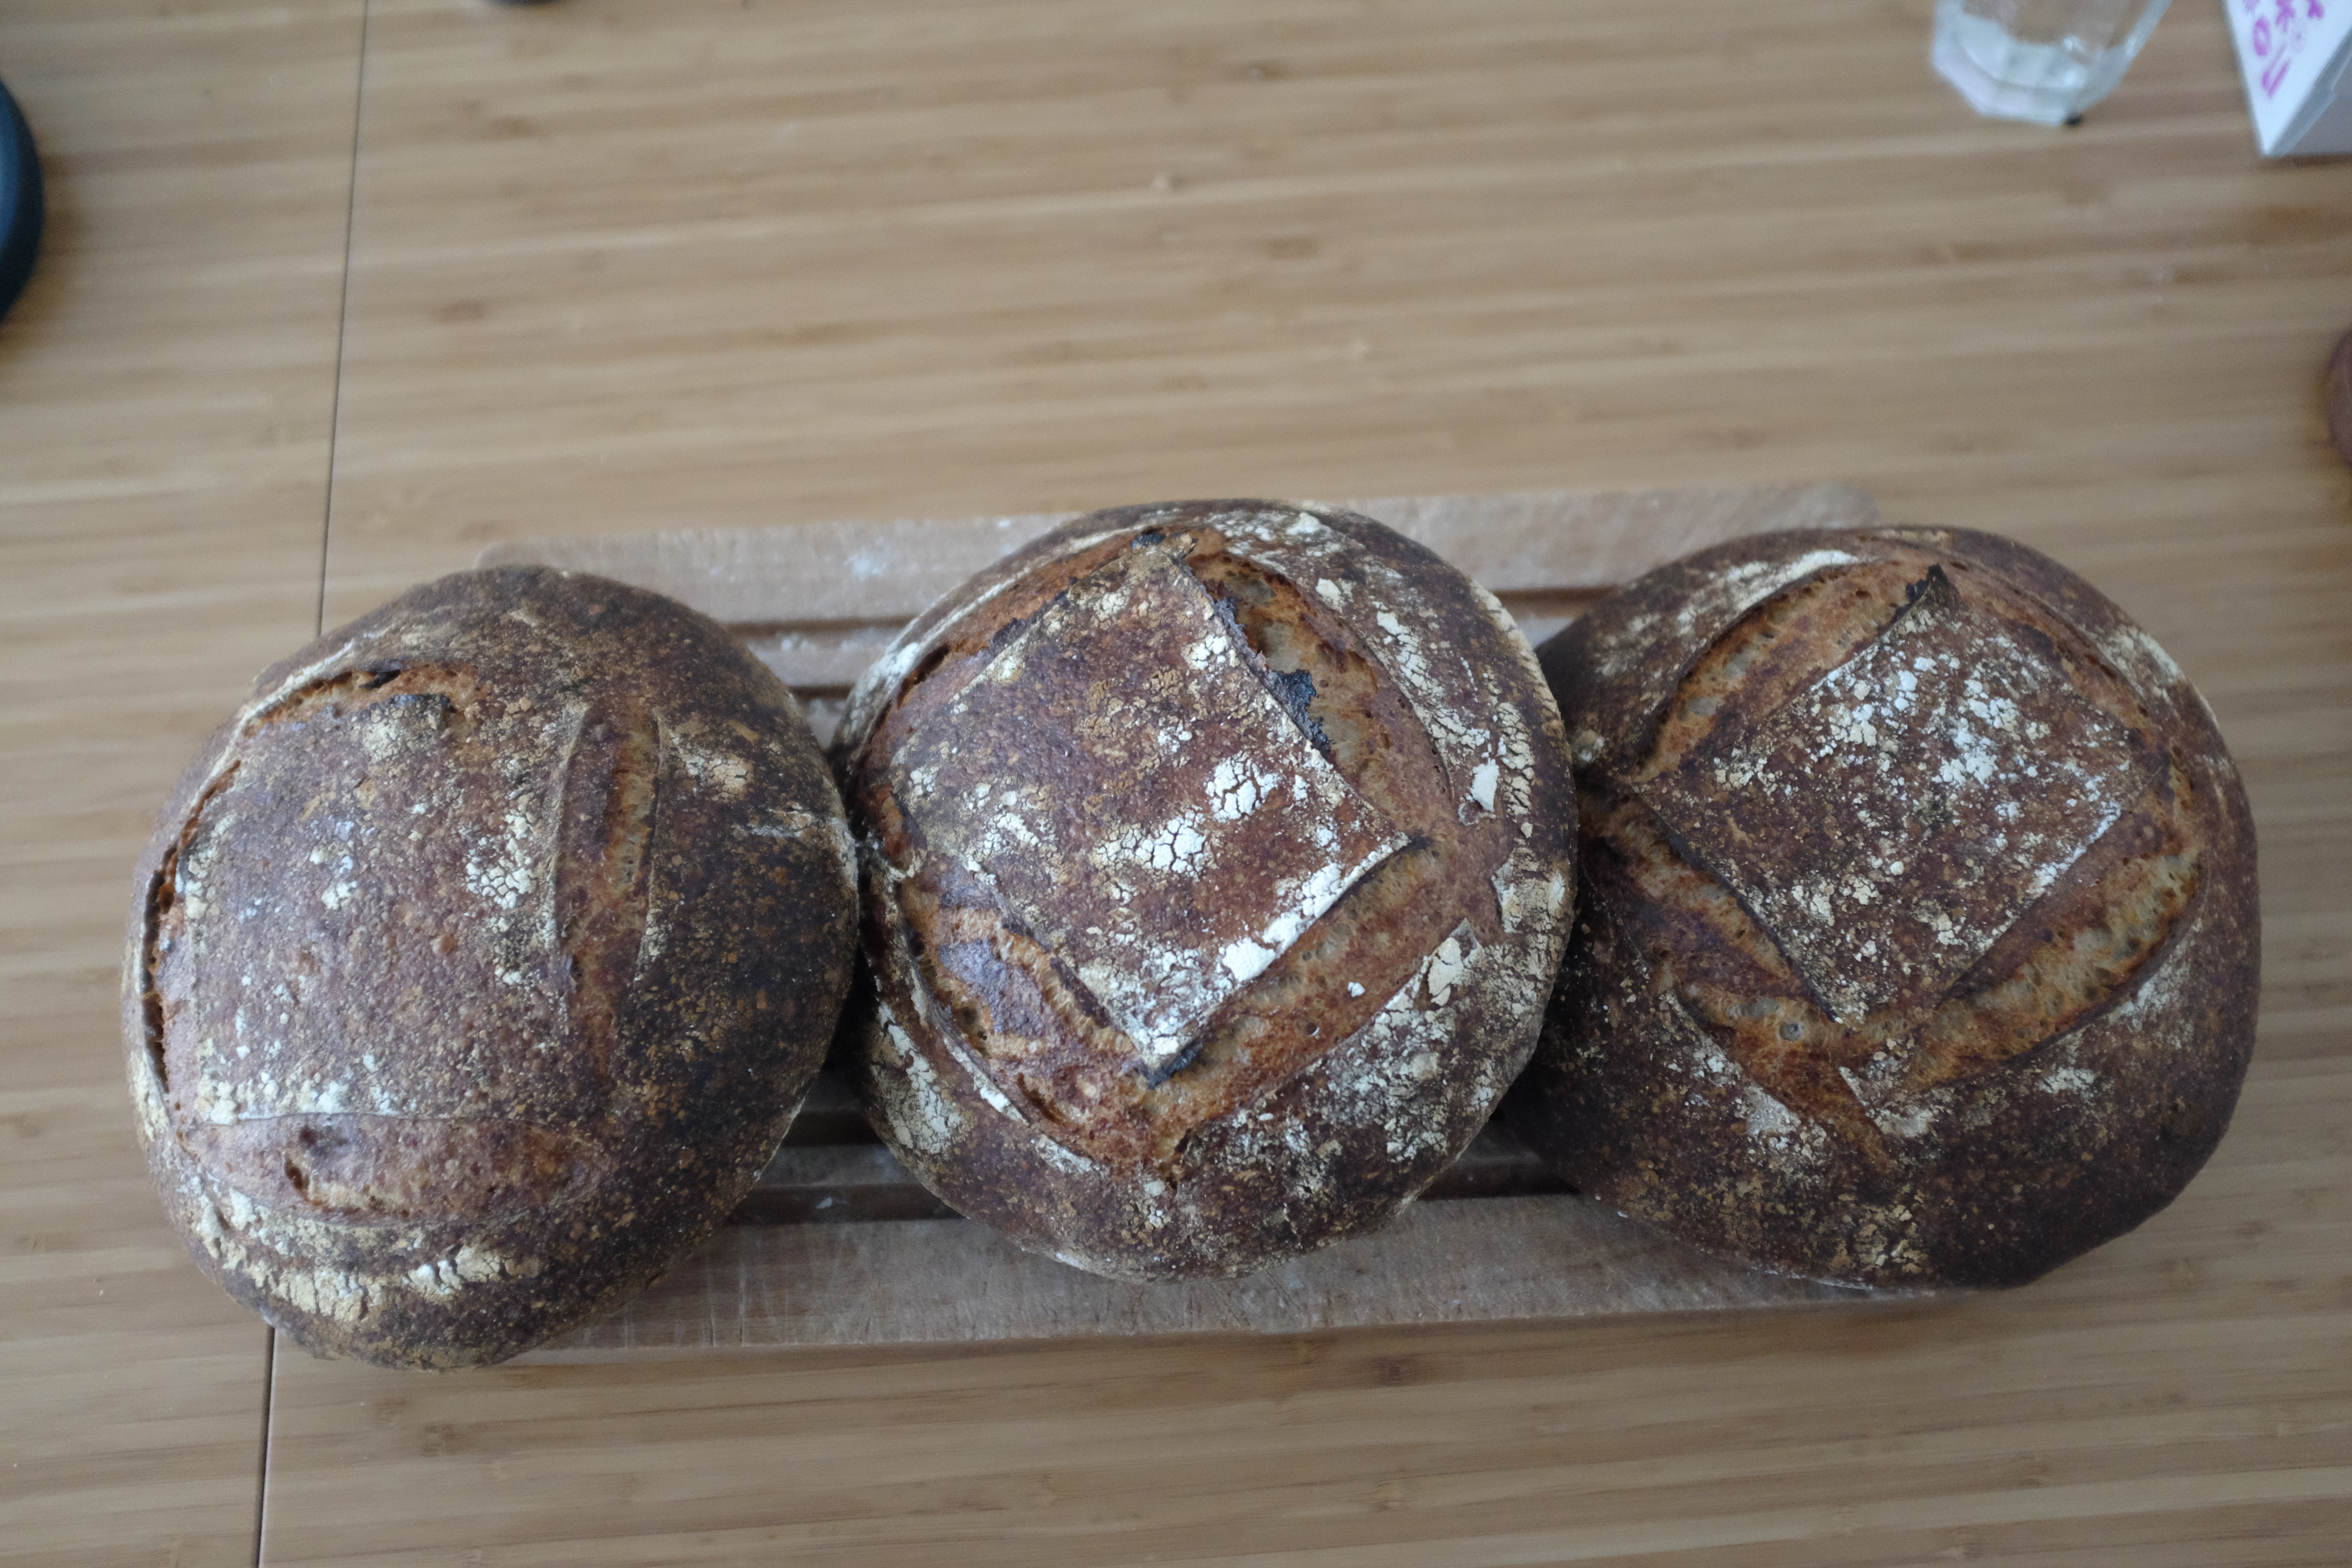 The curst of the wholemeal & rye sourdough bread